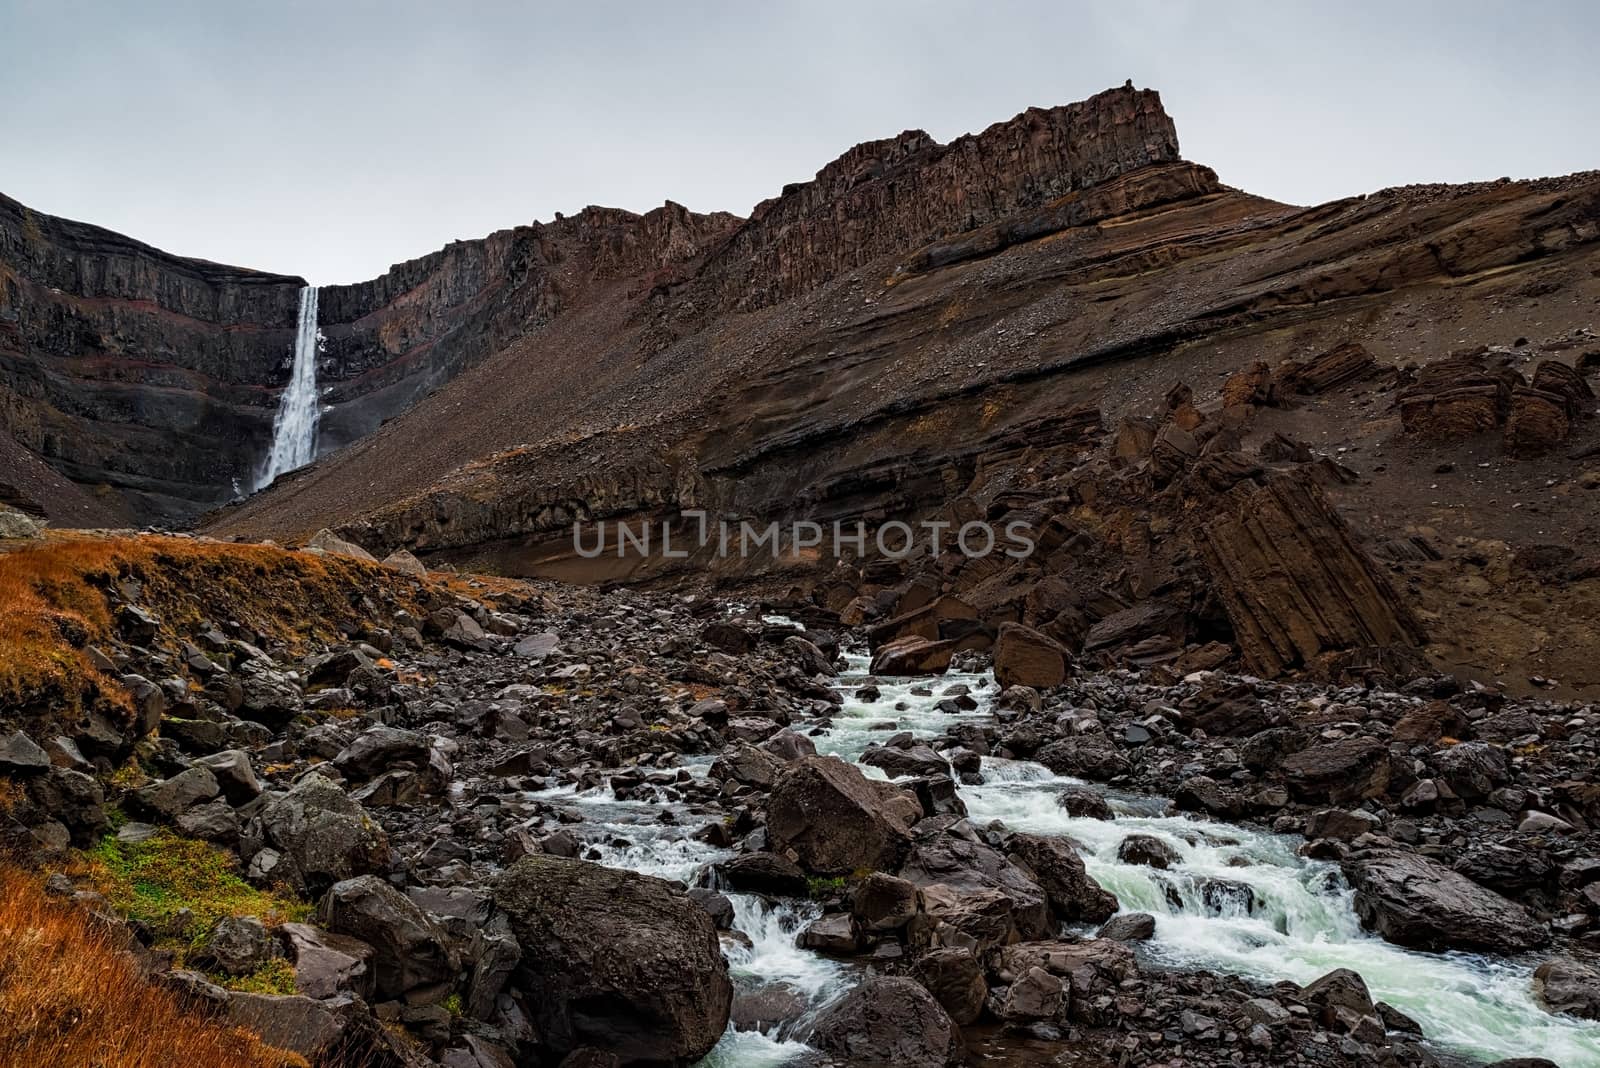 Hengifoss waterfall in eastside of Iceland in a cloudy day